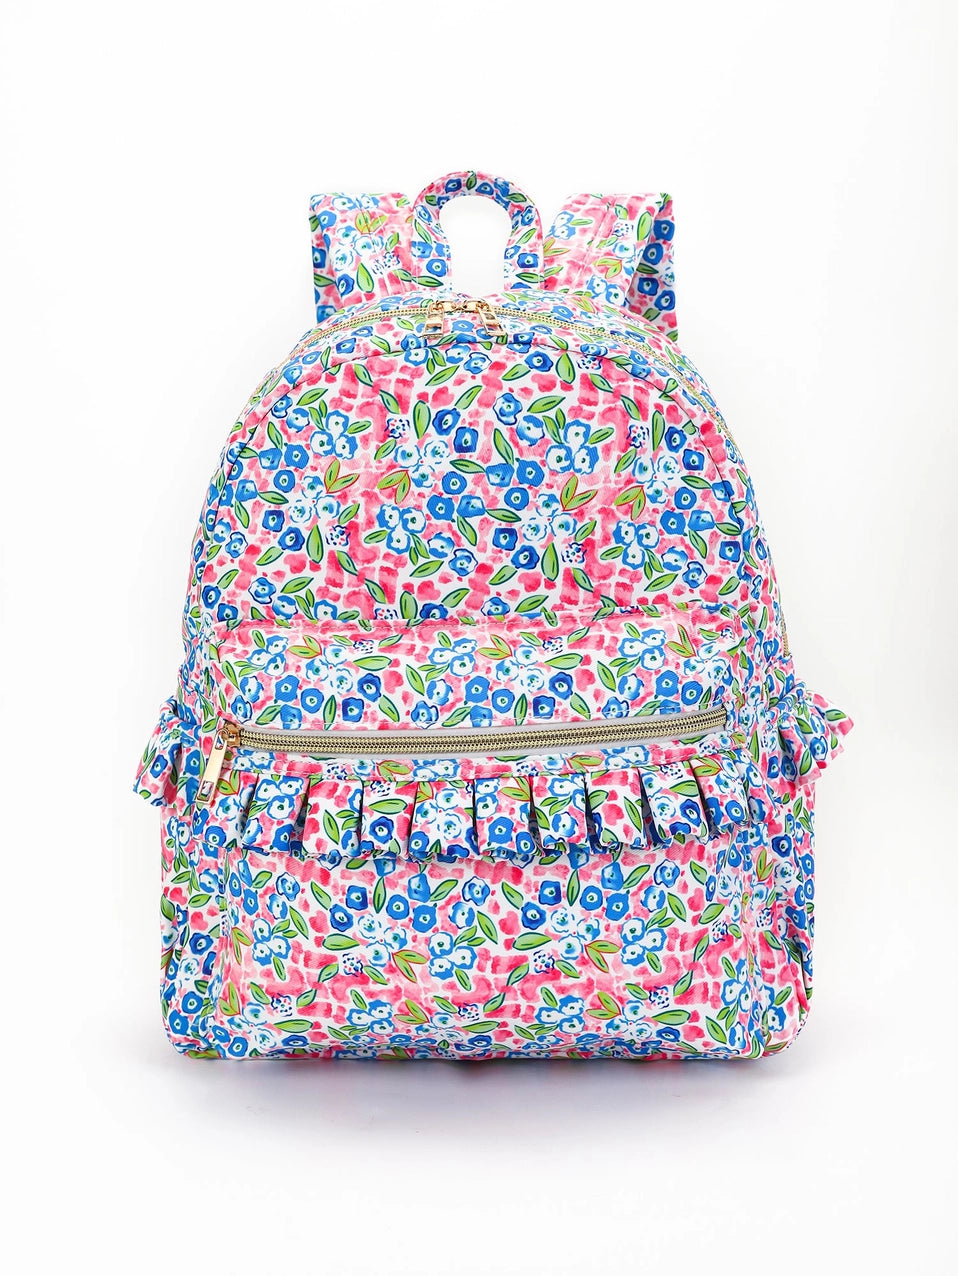 Lily Floral Ruffle Kids Backpack - Blue